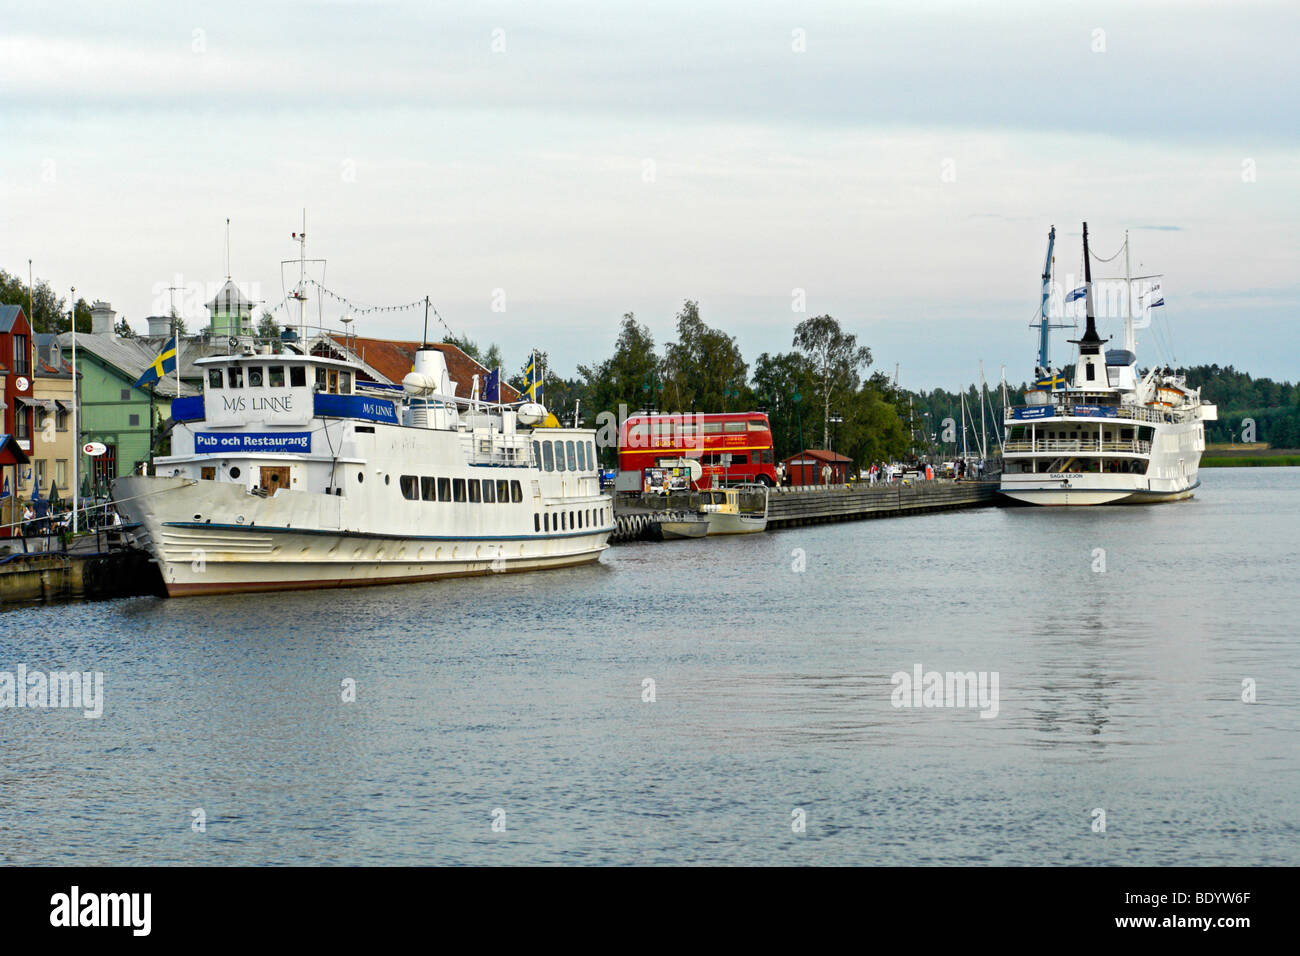 The harbour in Nykoping Sweden, showing archipelago excursion ship M.S. Linne with the Saga Lejon in the middle distance Stock Photo